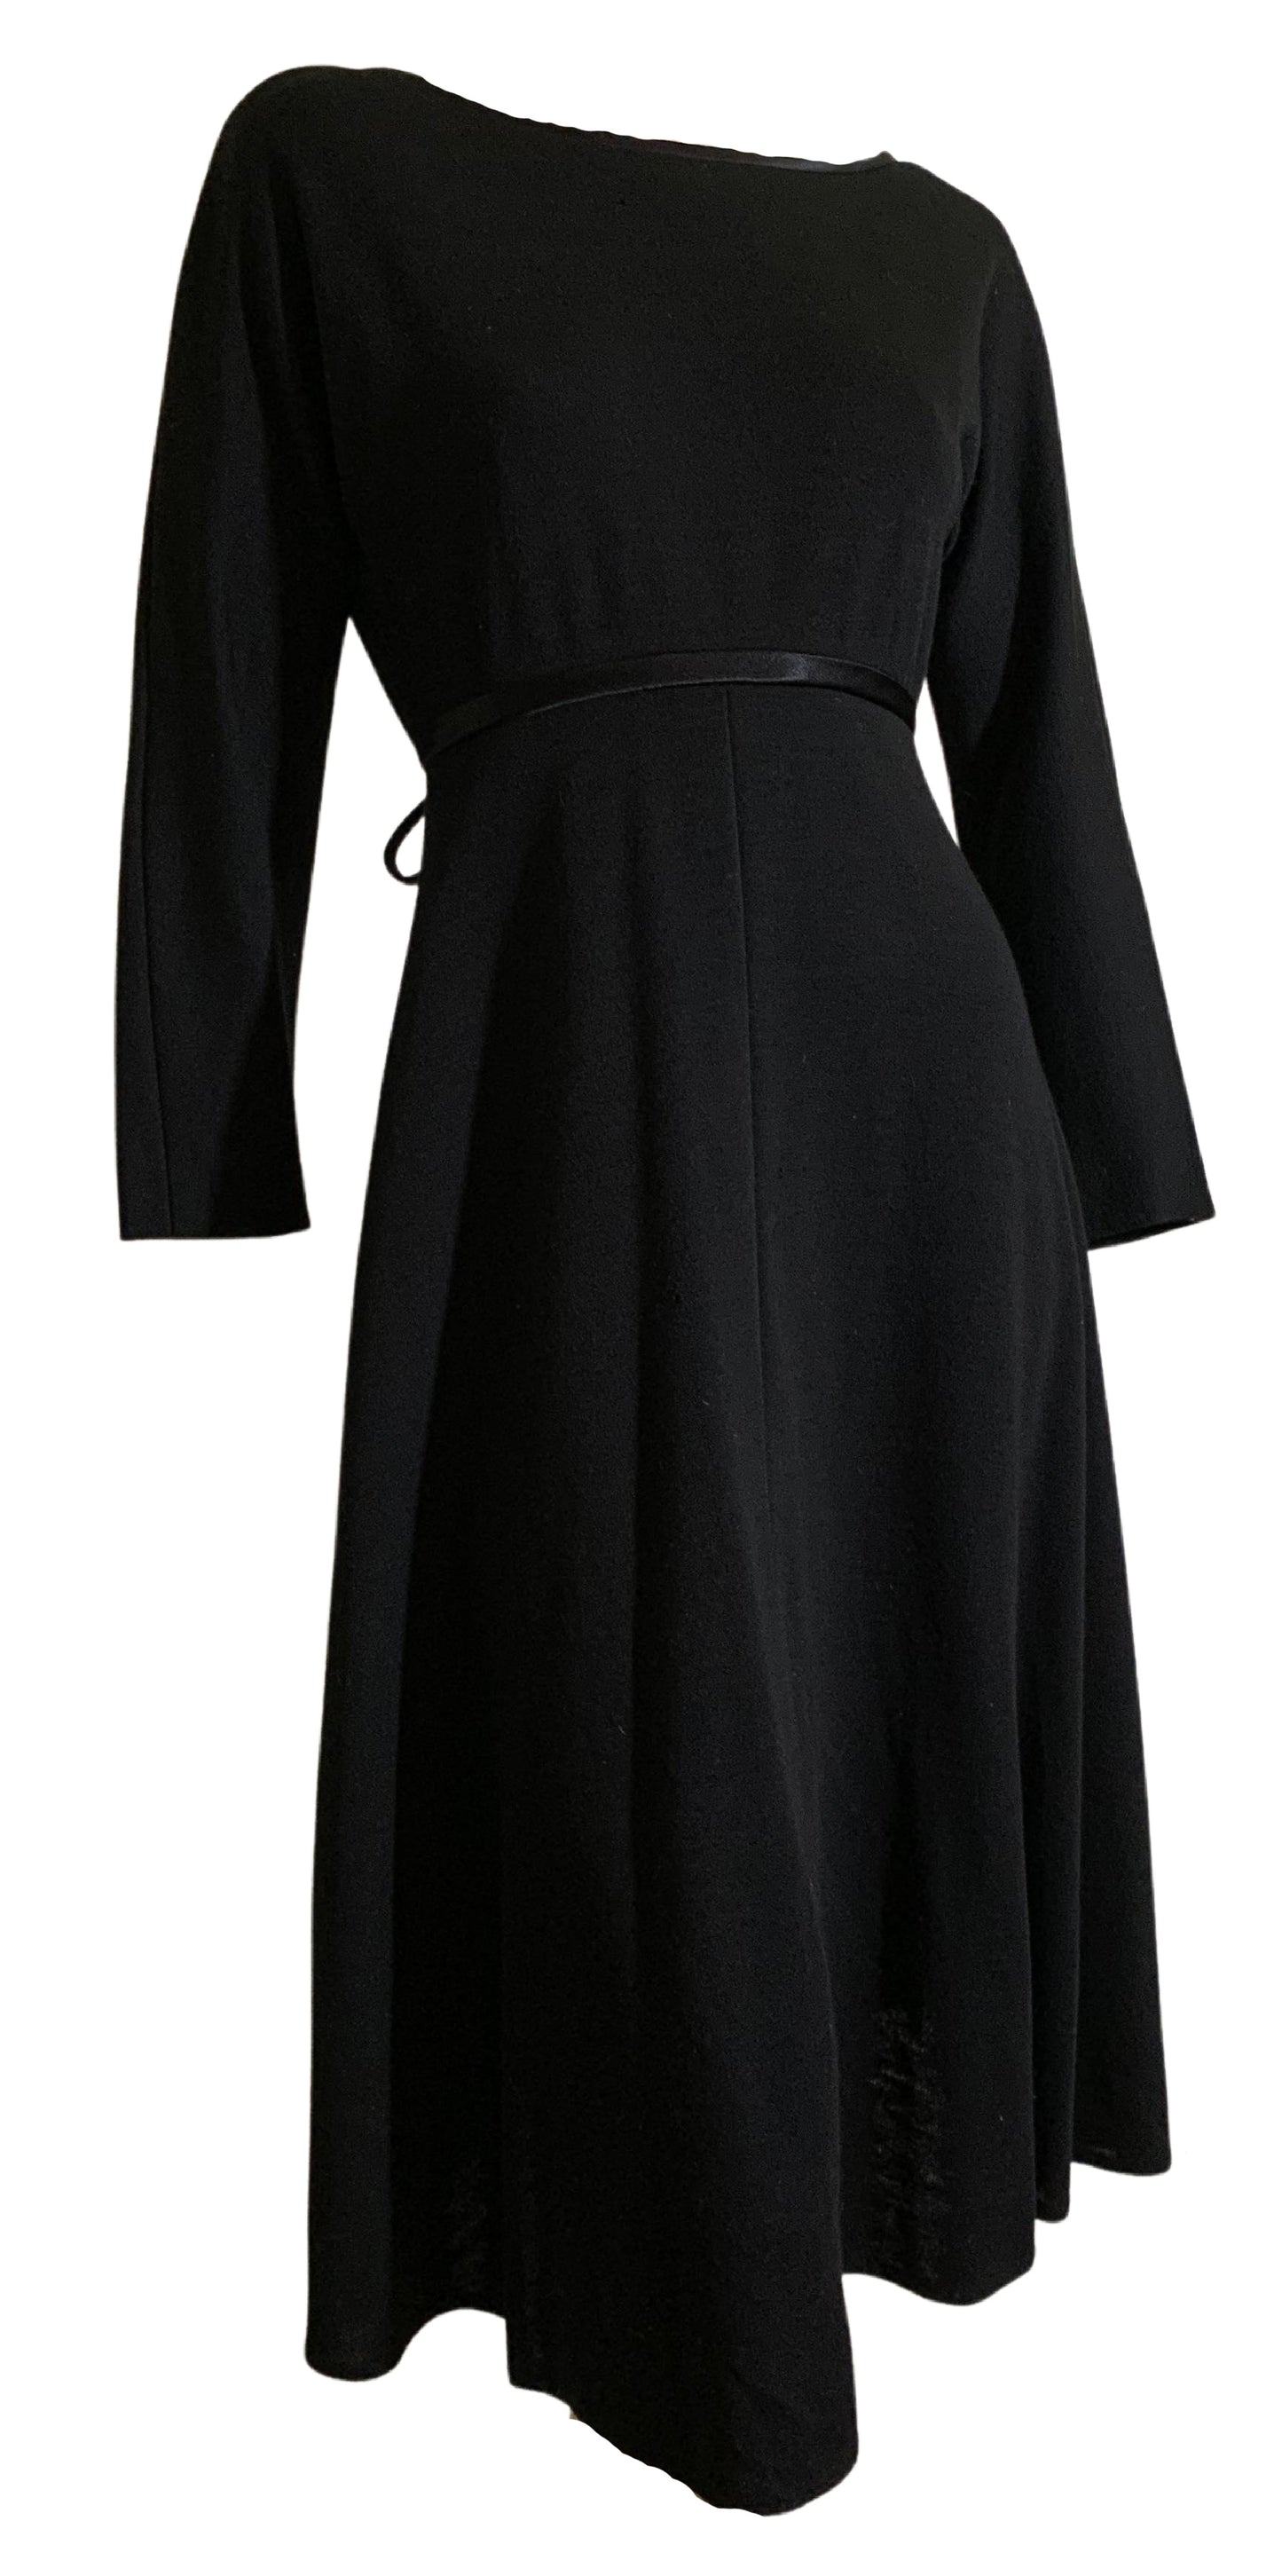 Black Wool Wrap Dress Low Back with Bow with POCKETS! circa 1960s